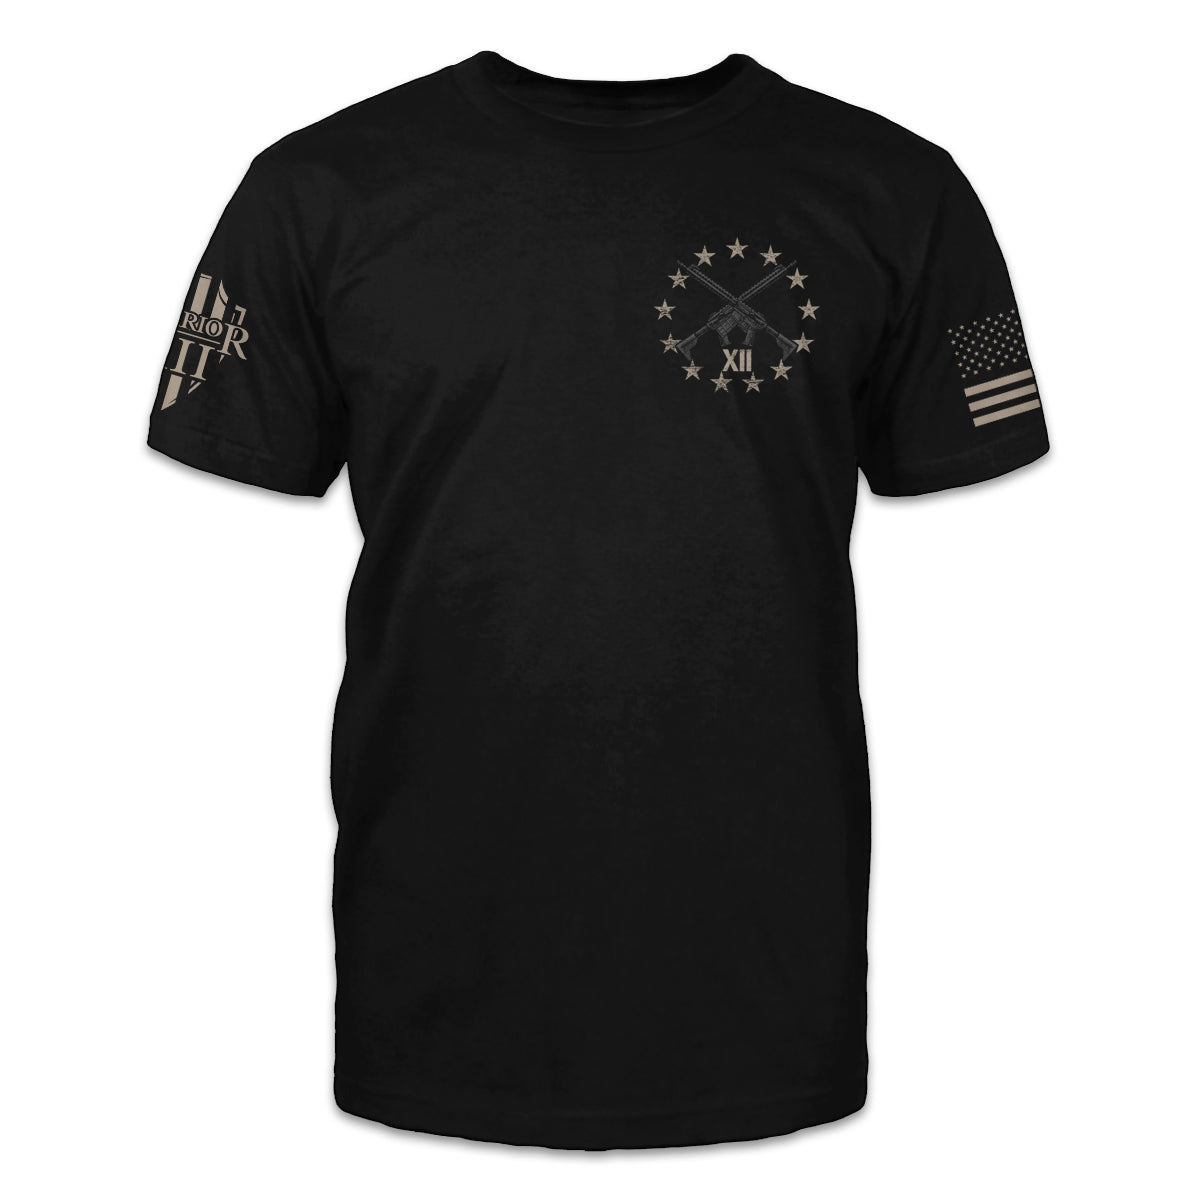 A black t-shirt with stars and guns on the front of the 1776% Sure shirt..